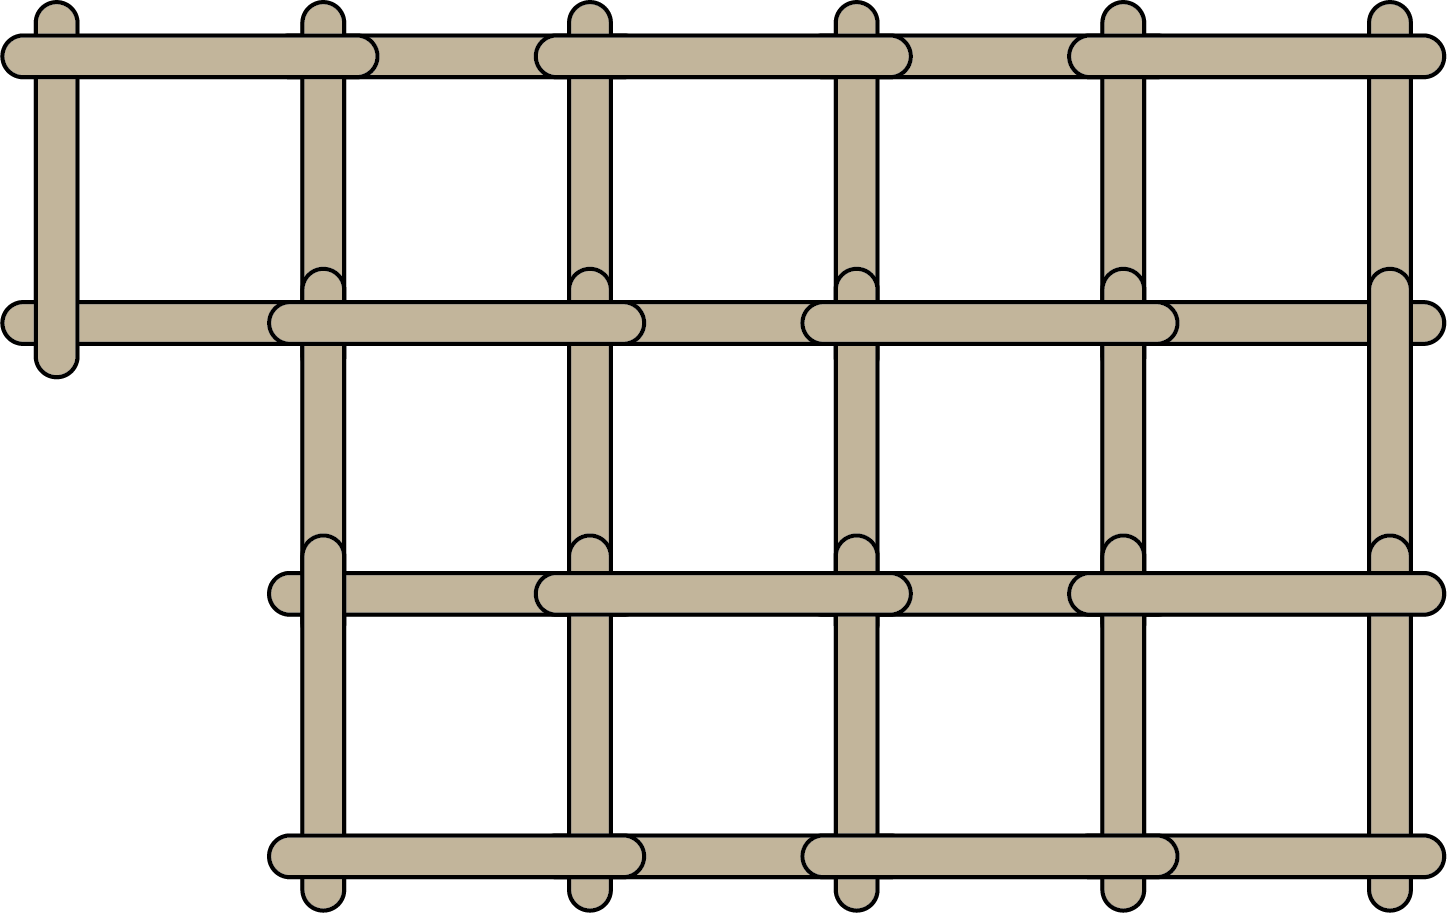 31 sticks form a 3 by 4 grid of 12 squares. Three vertical sticks placed in a line form each vertical line in the grid. Four horizontal sticks placed along a line form each horizontal line in the grid. Three additional sticks are used to create one more square along one edge of the grid.